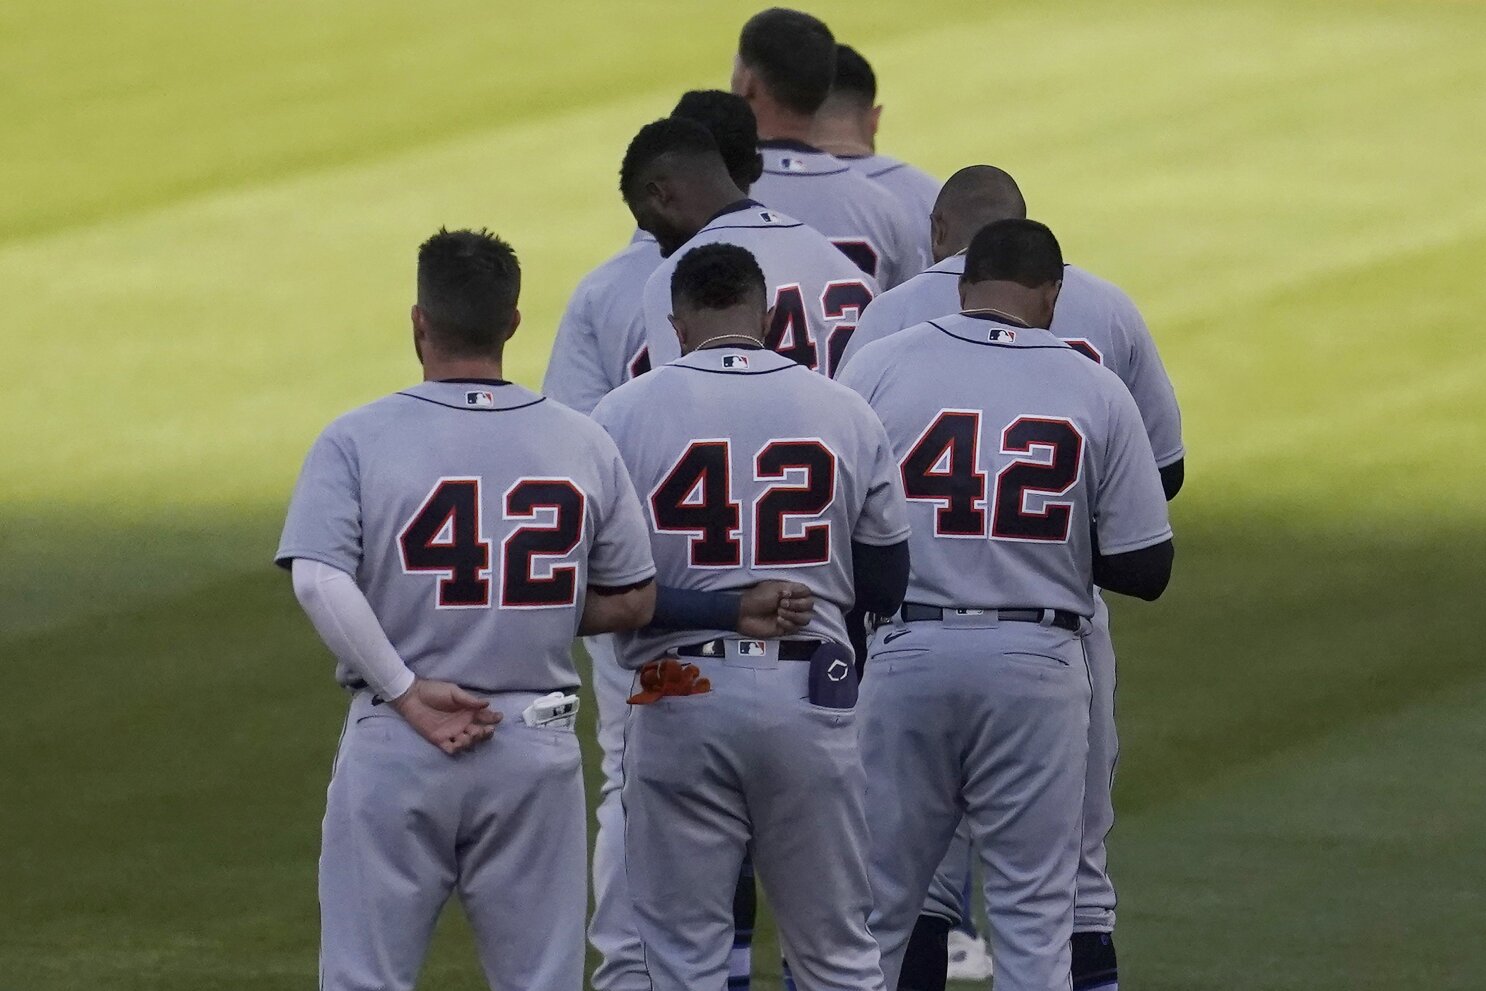 Astros, Rangers wear No. 42 in honor of Jackie Robinson Day